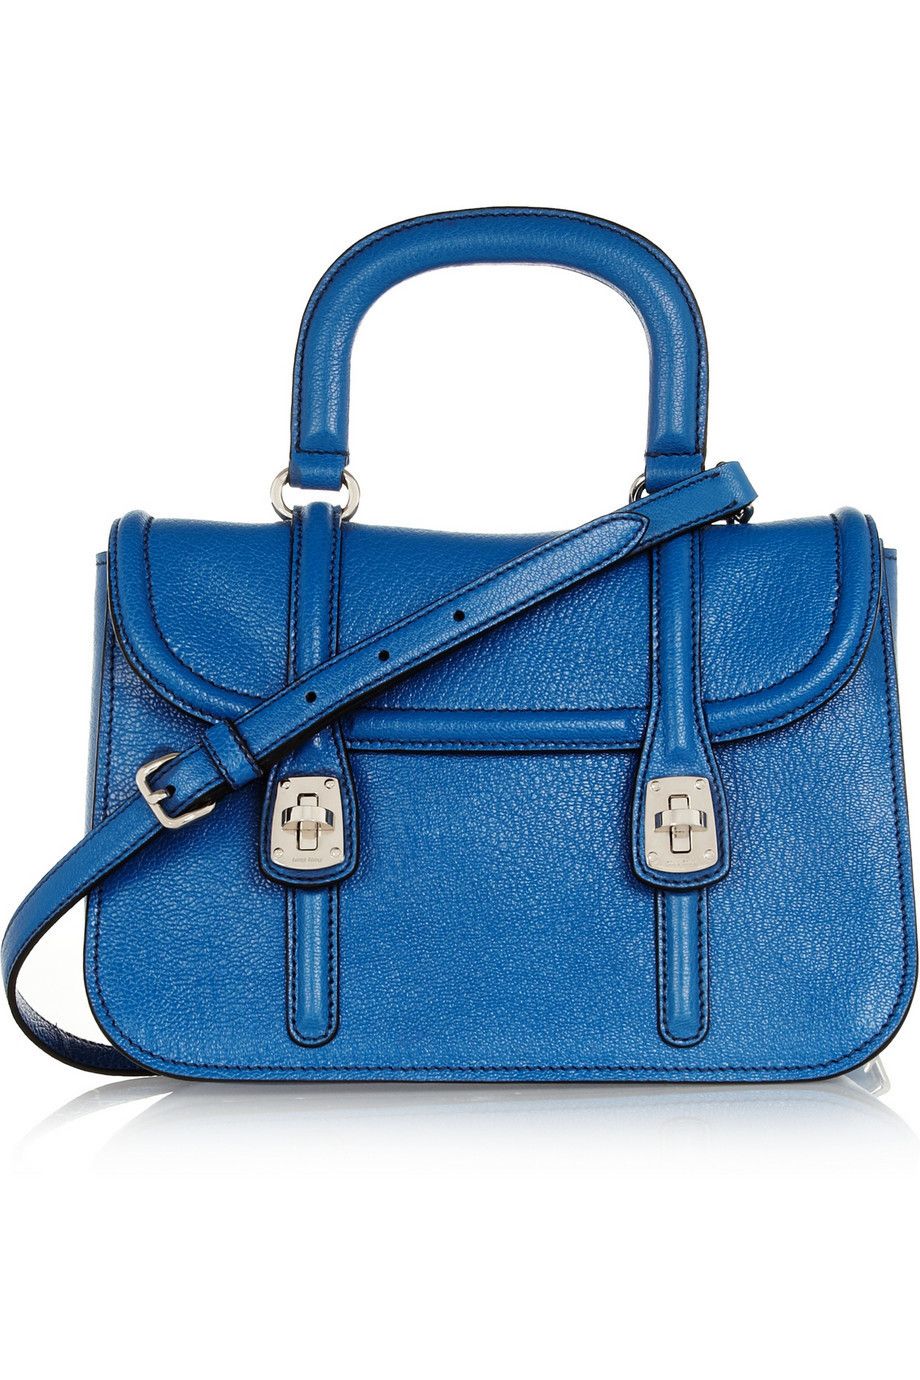 Blue, Product, Bag, White, Fashion accessory, Style, Electric blue, Luggage and bags, Strap, Shoulder bag, 